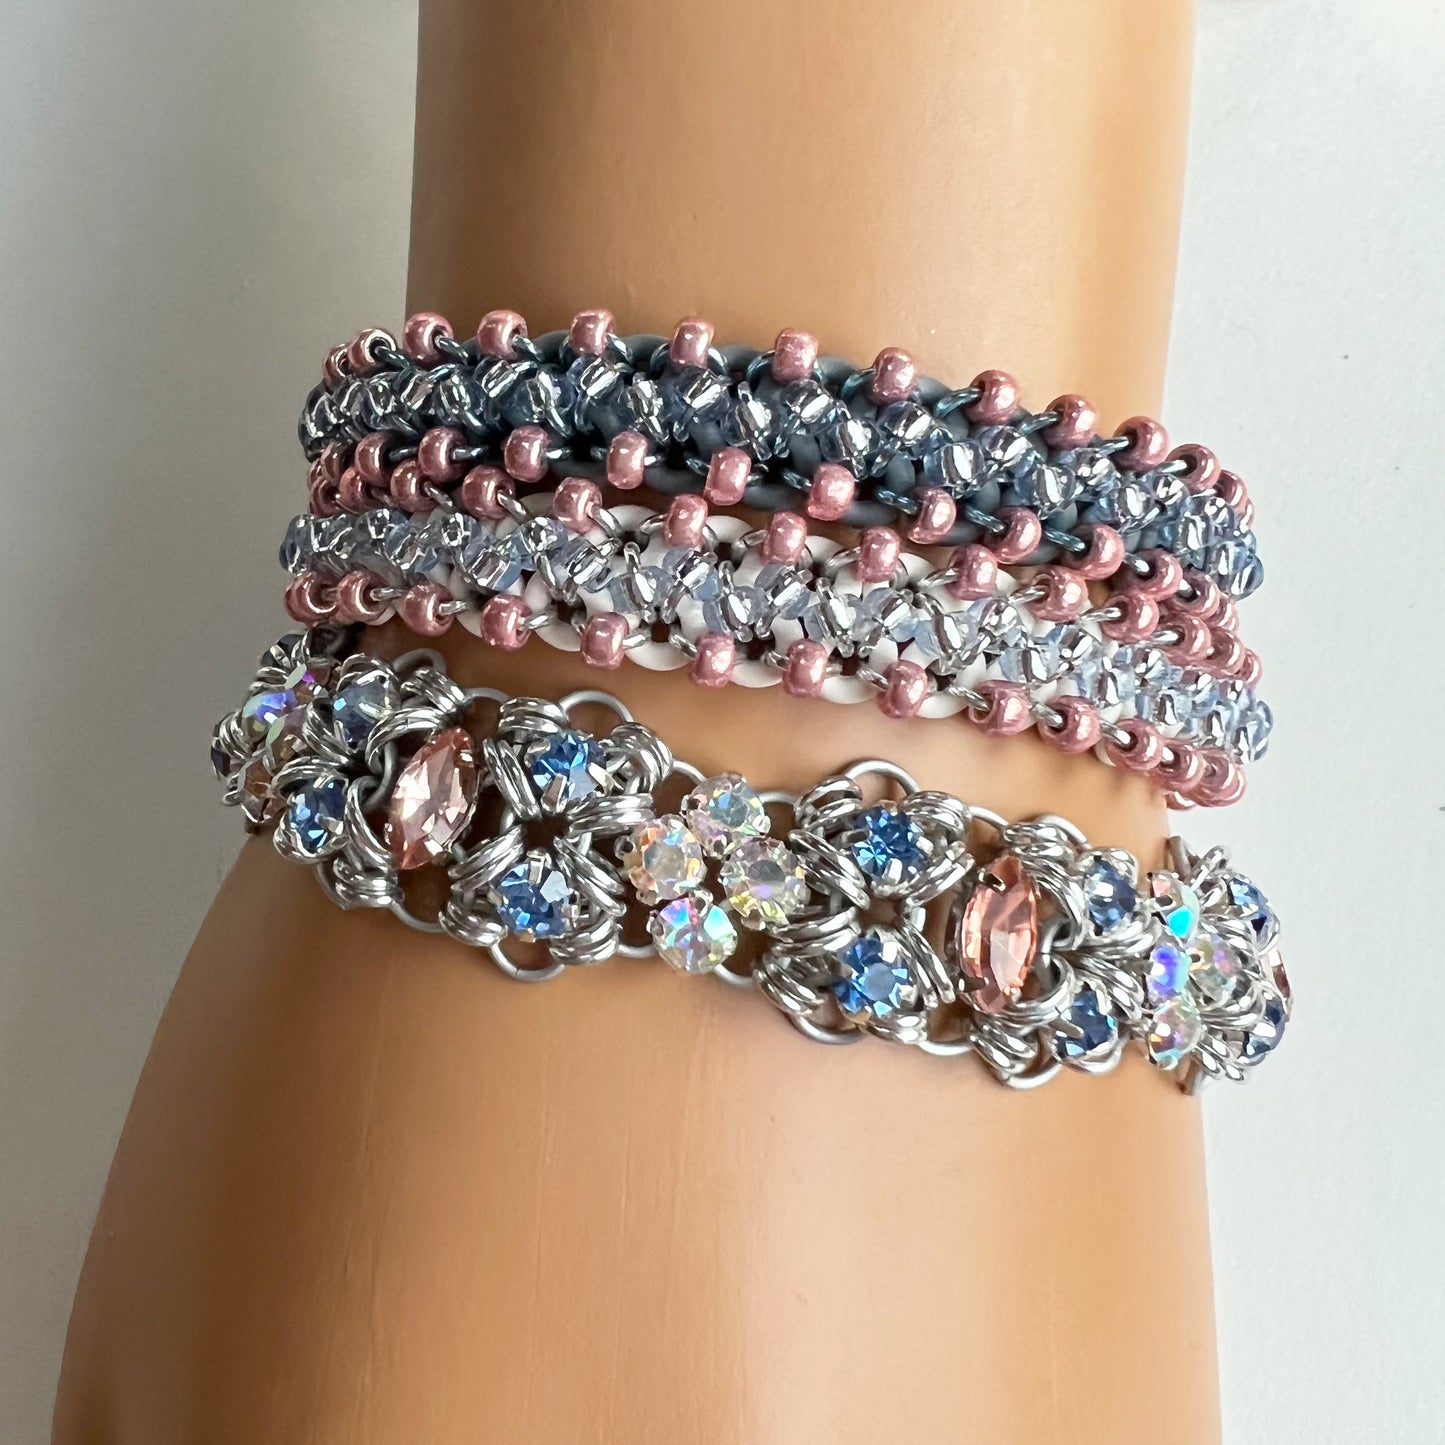 Marchioness of Diamonds Bracelet Kit with Video Class - Silver, Blush, Light Sapphire & Crystal AB